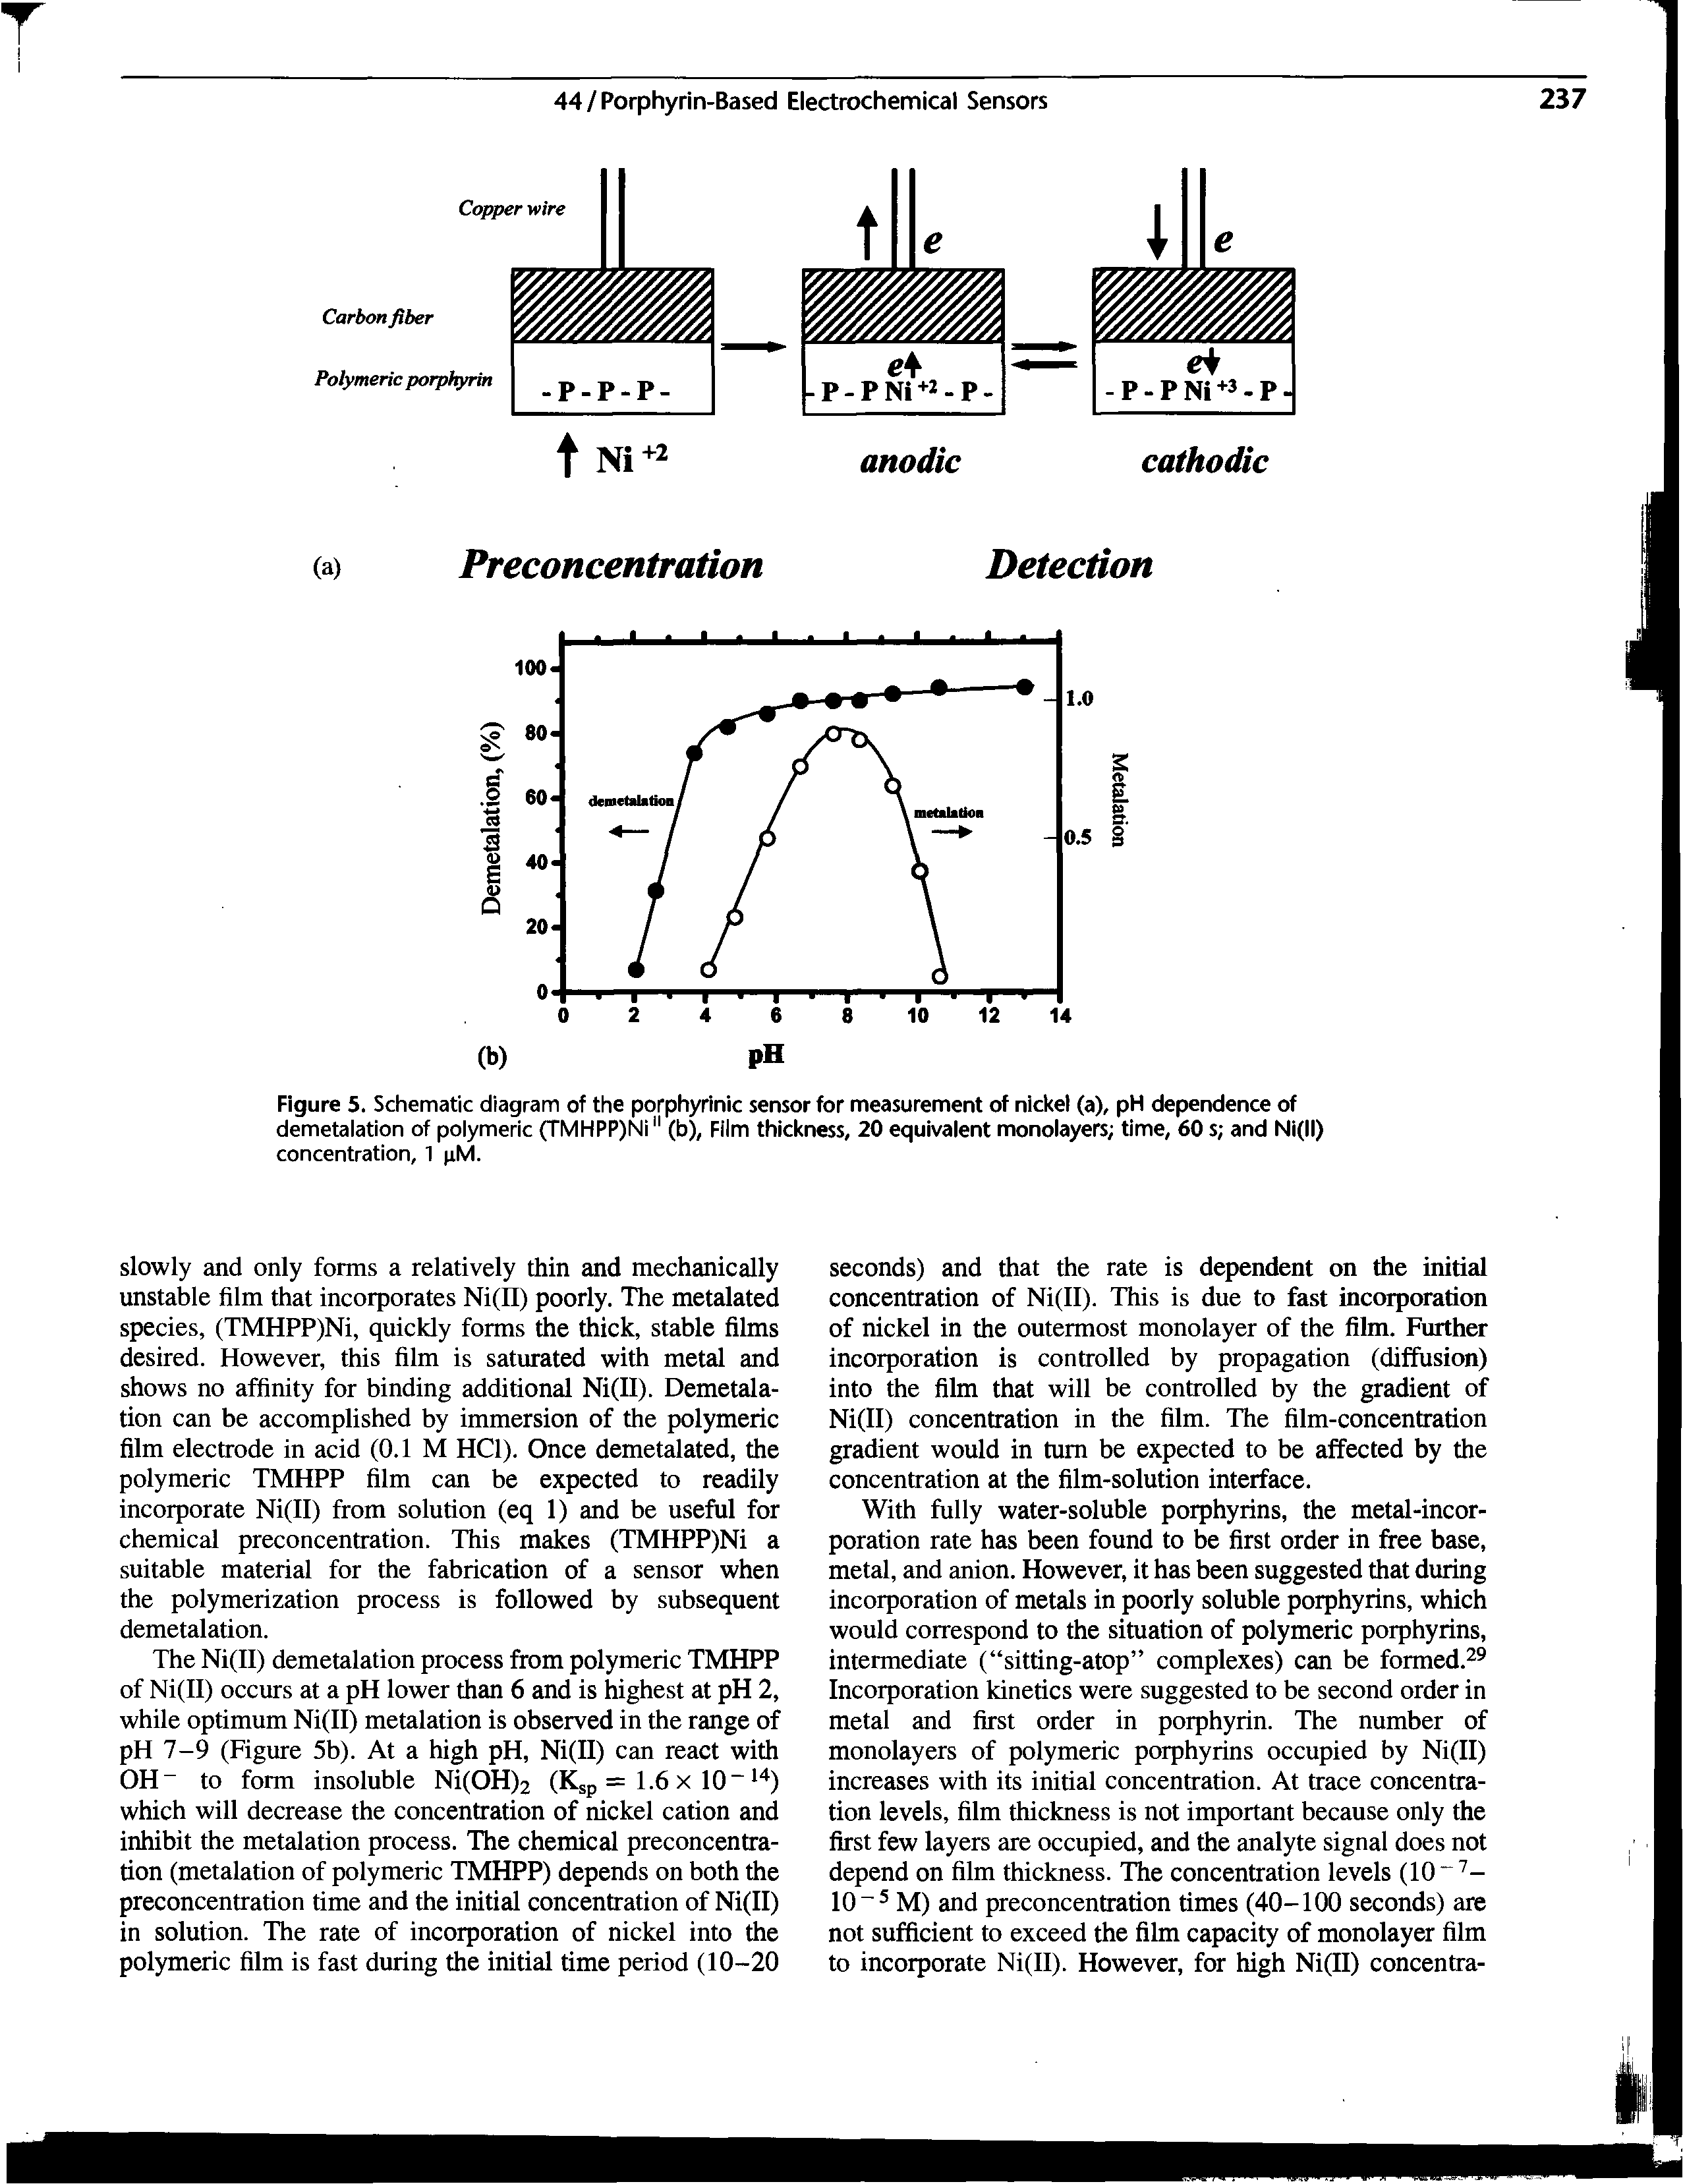 Figure 5. Schematic diagram of the porphyrinic sensor for measurement of nickel (a), pH deperKlence of demetalation of polymeric (TMHPP)Ni" (b), Film thickness, 20 equivalent monolayers time, 60 s and Ni(ll)...